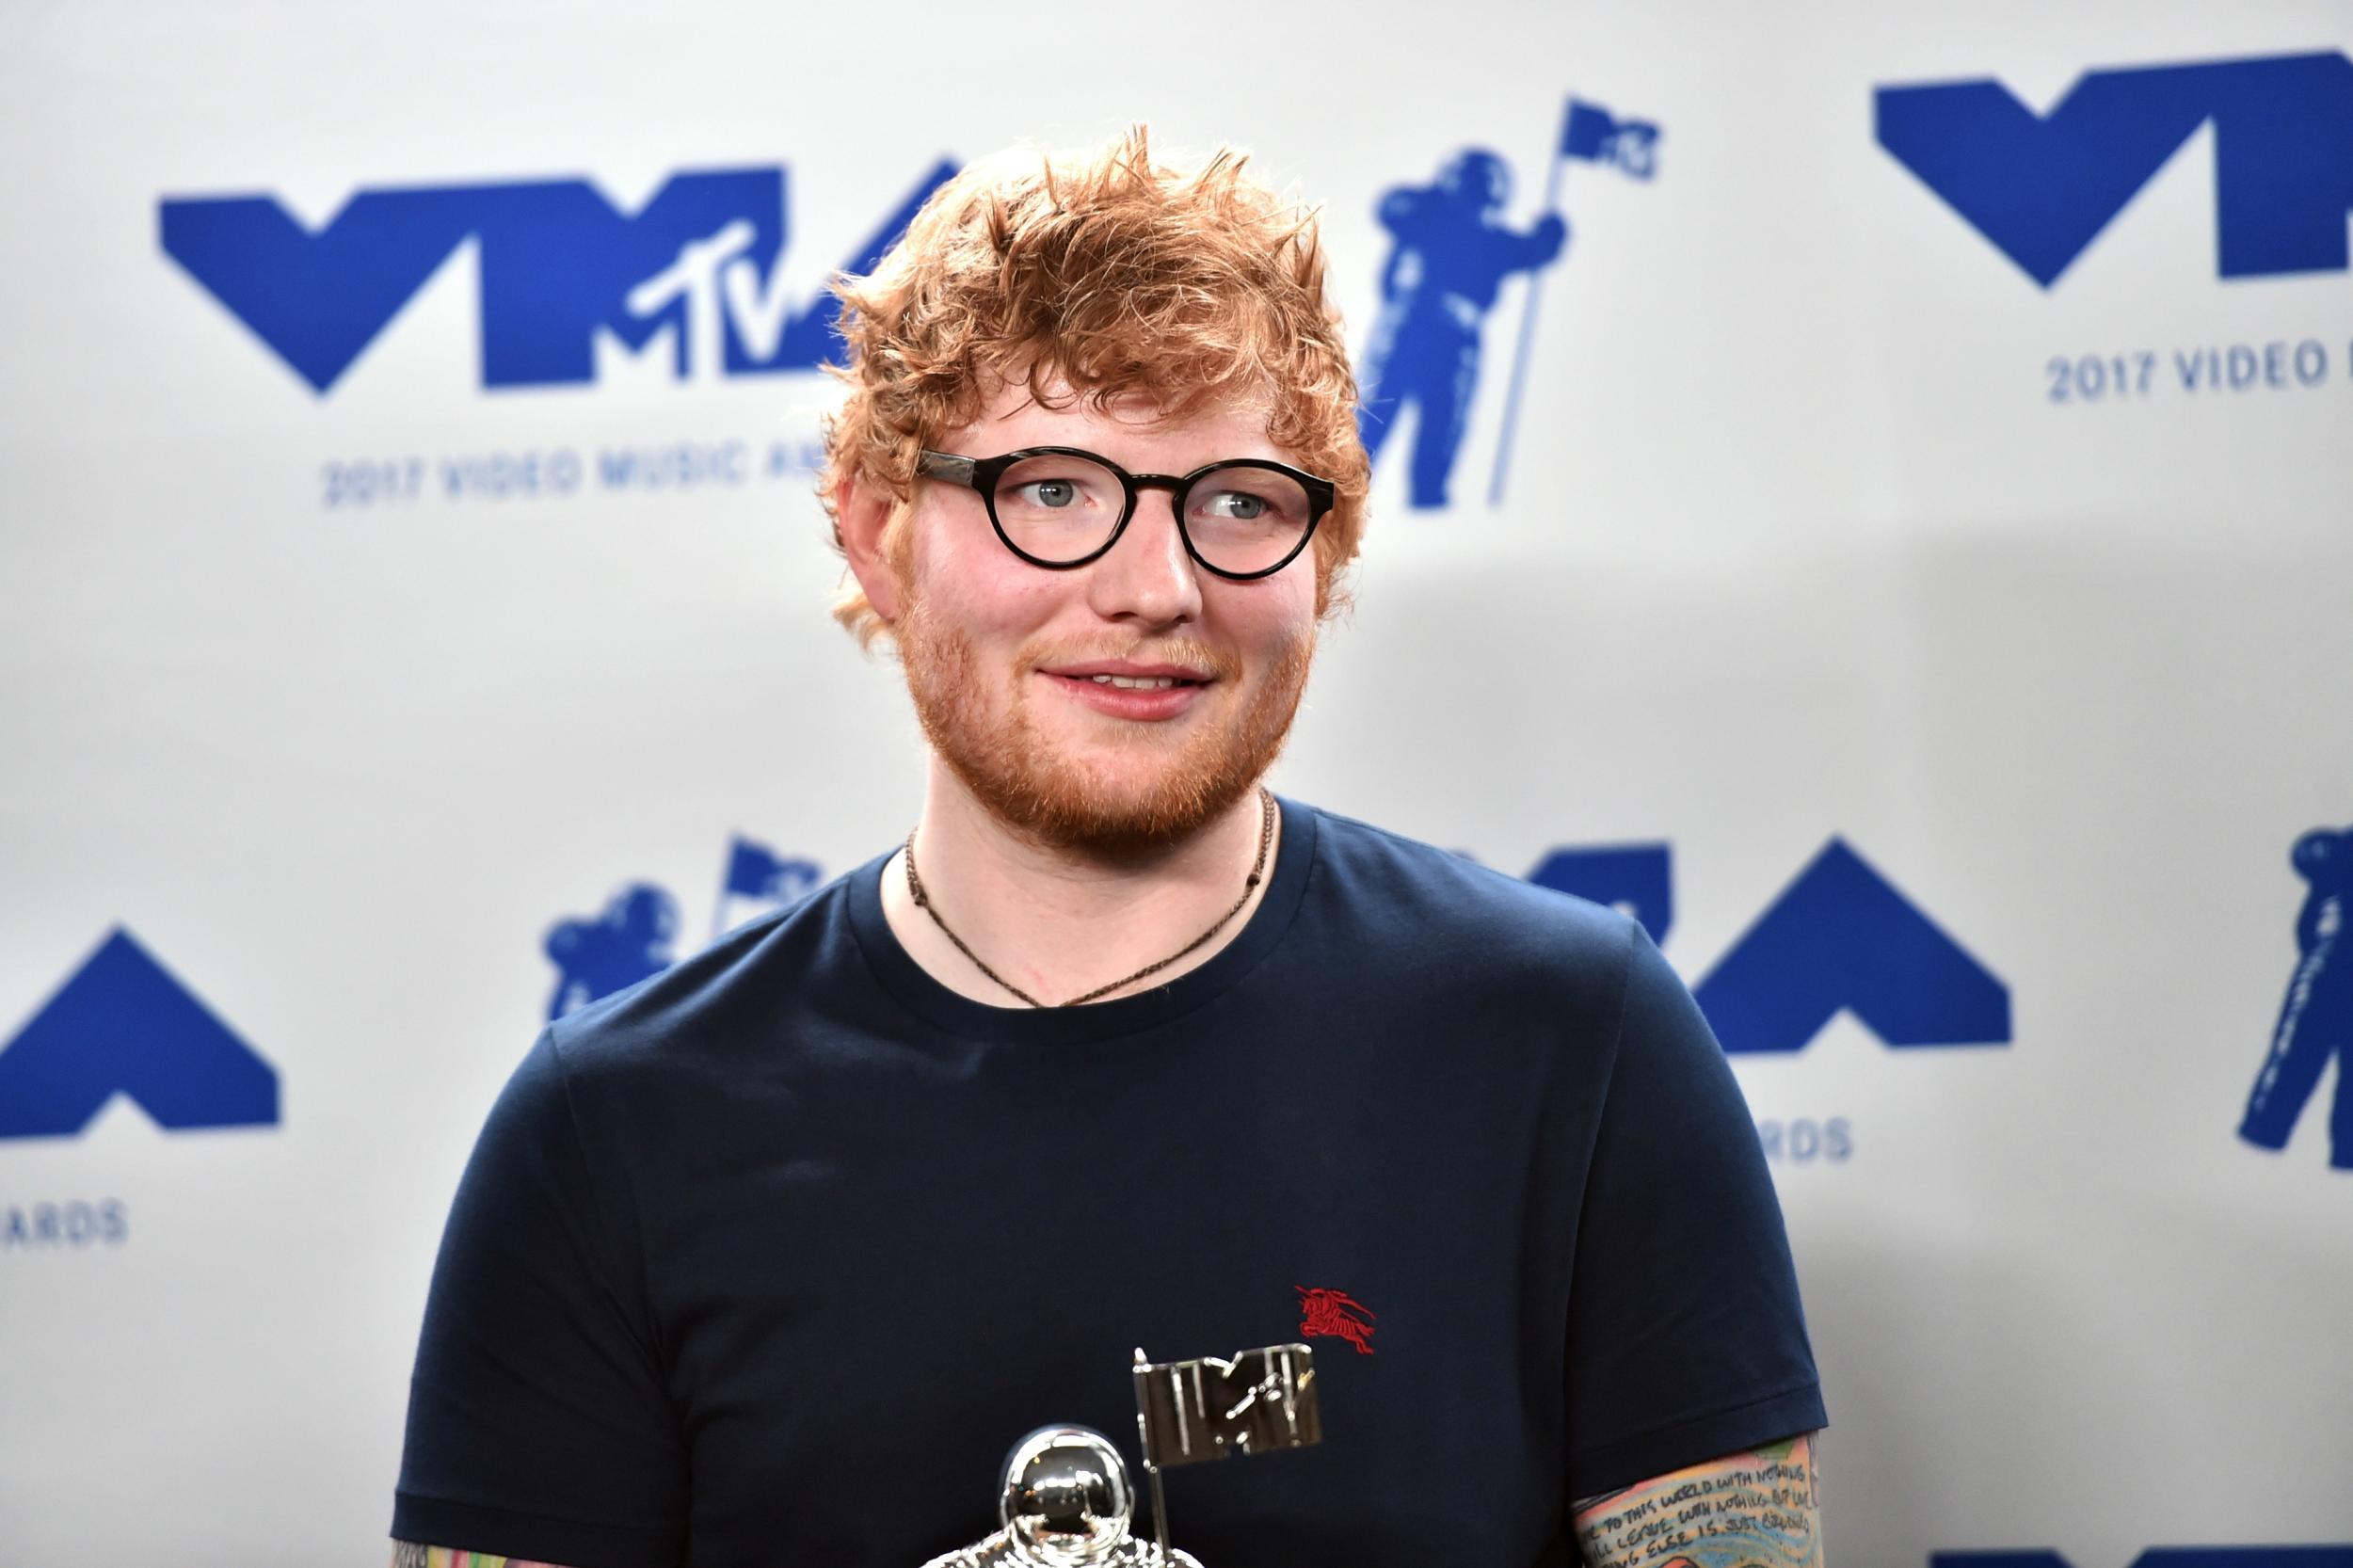 Ed Sheeran reveals secret struggle with substance abuse was the reason for his year off